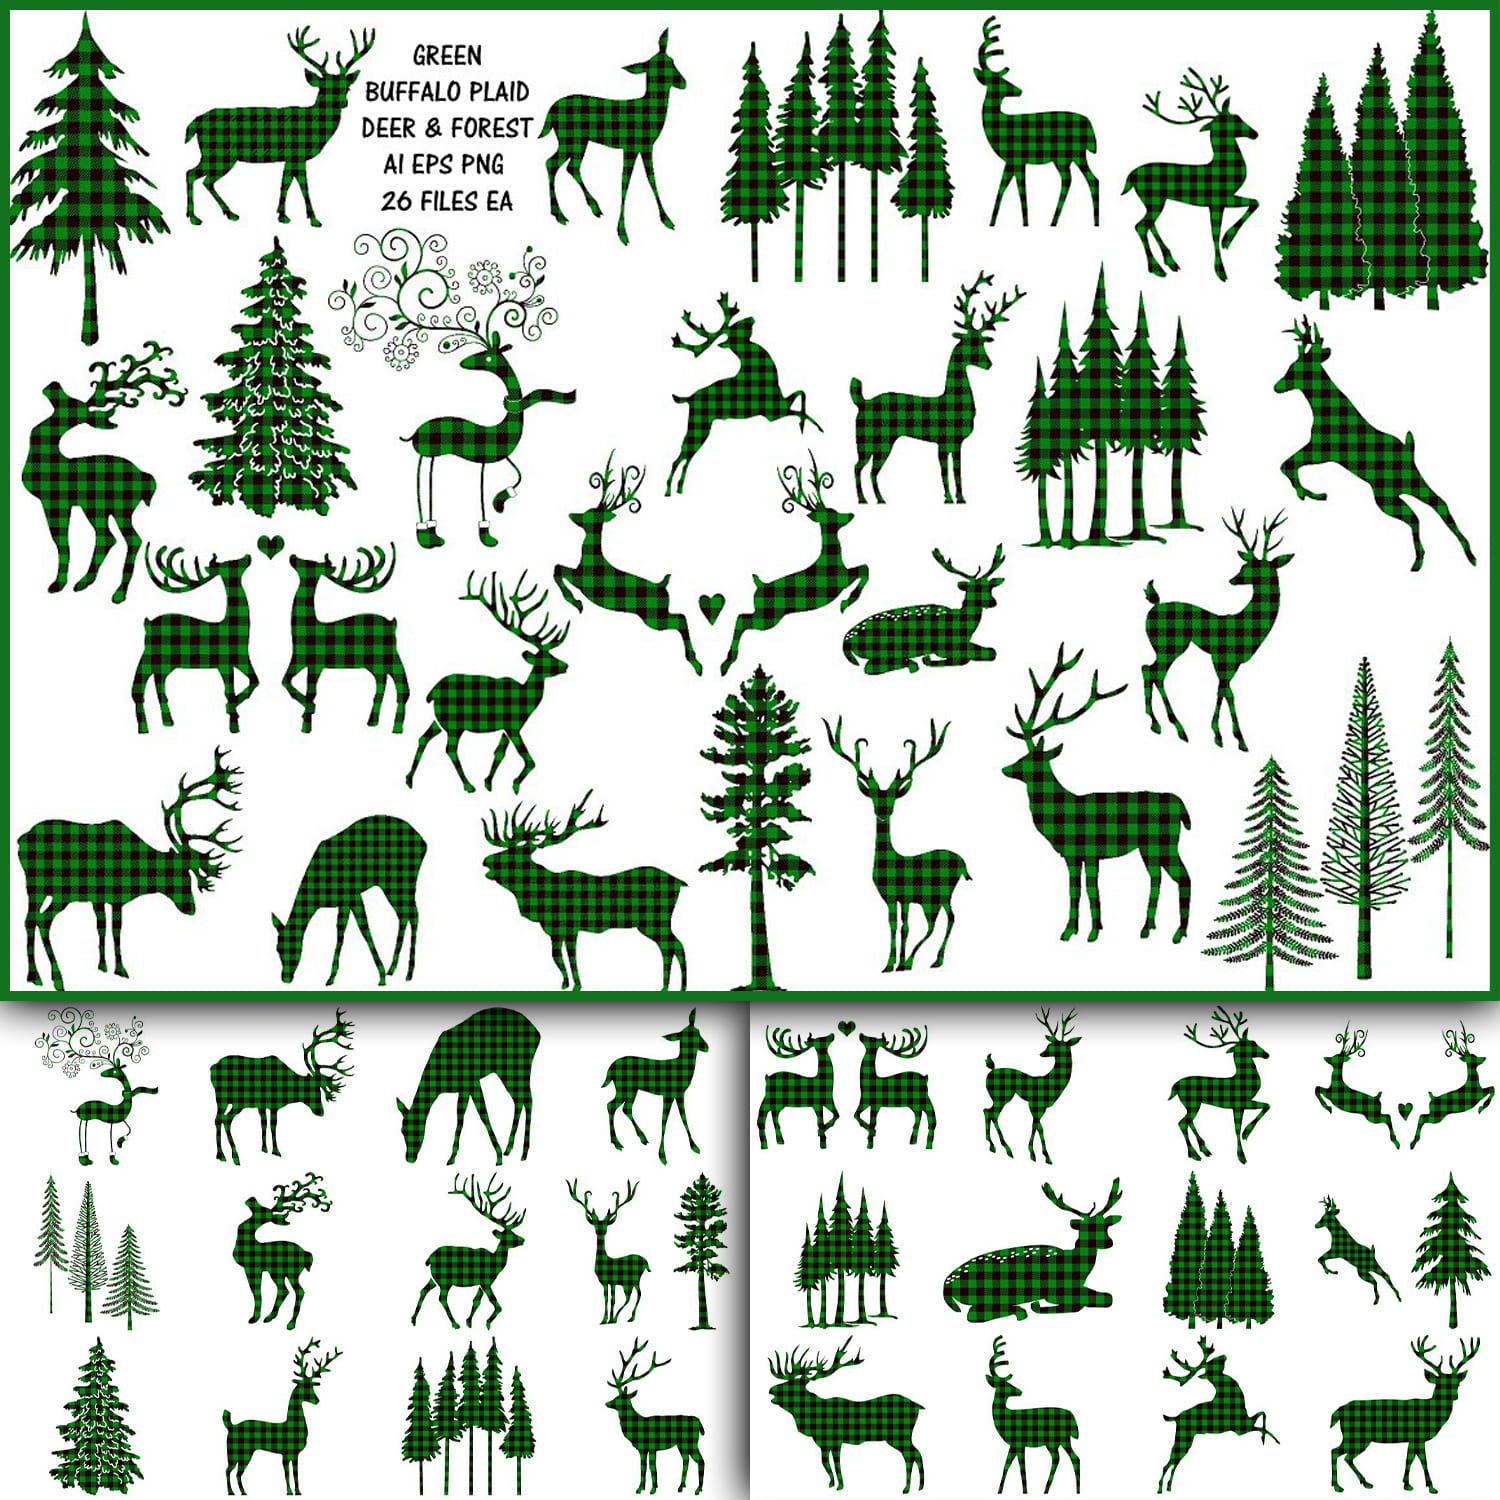 Green Buffalo Plaid Deer/Forest cover.